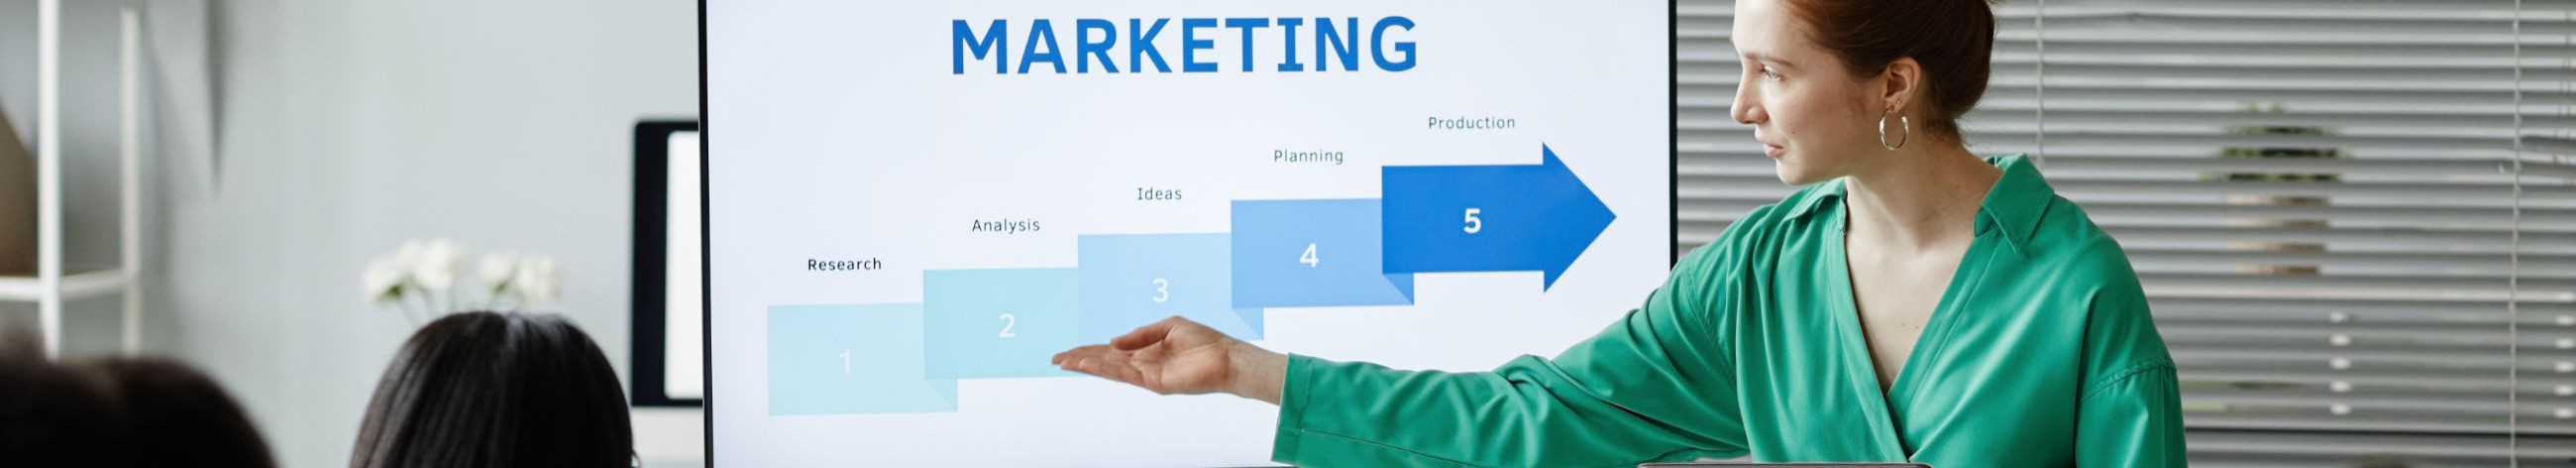 Marketing Automation, INTRODUCTIONS, marketing audit, Mentoring, selling funnels, Automation, Digital Marketing